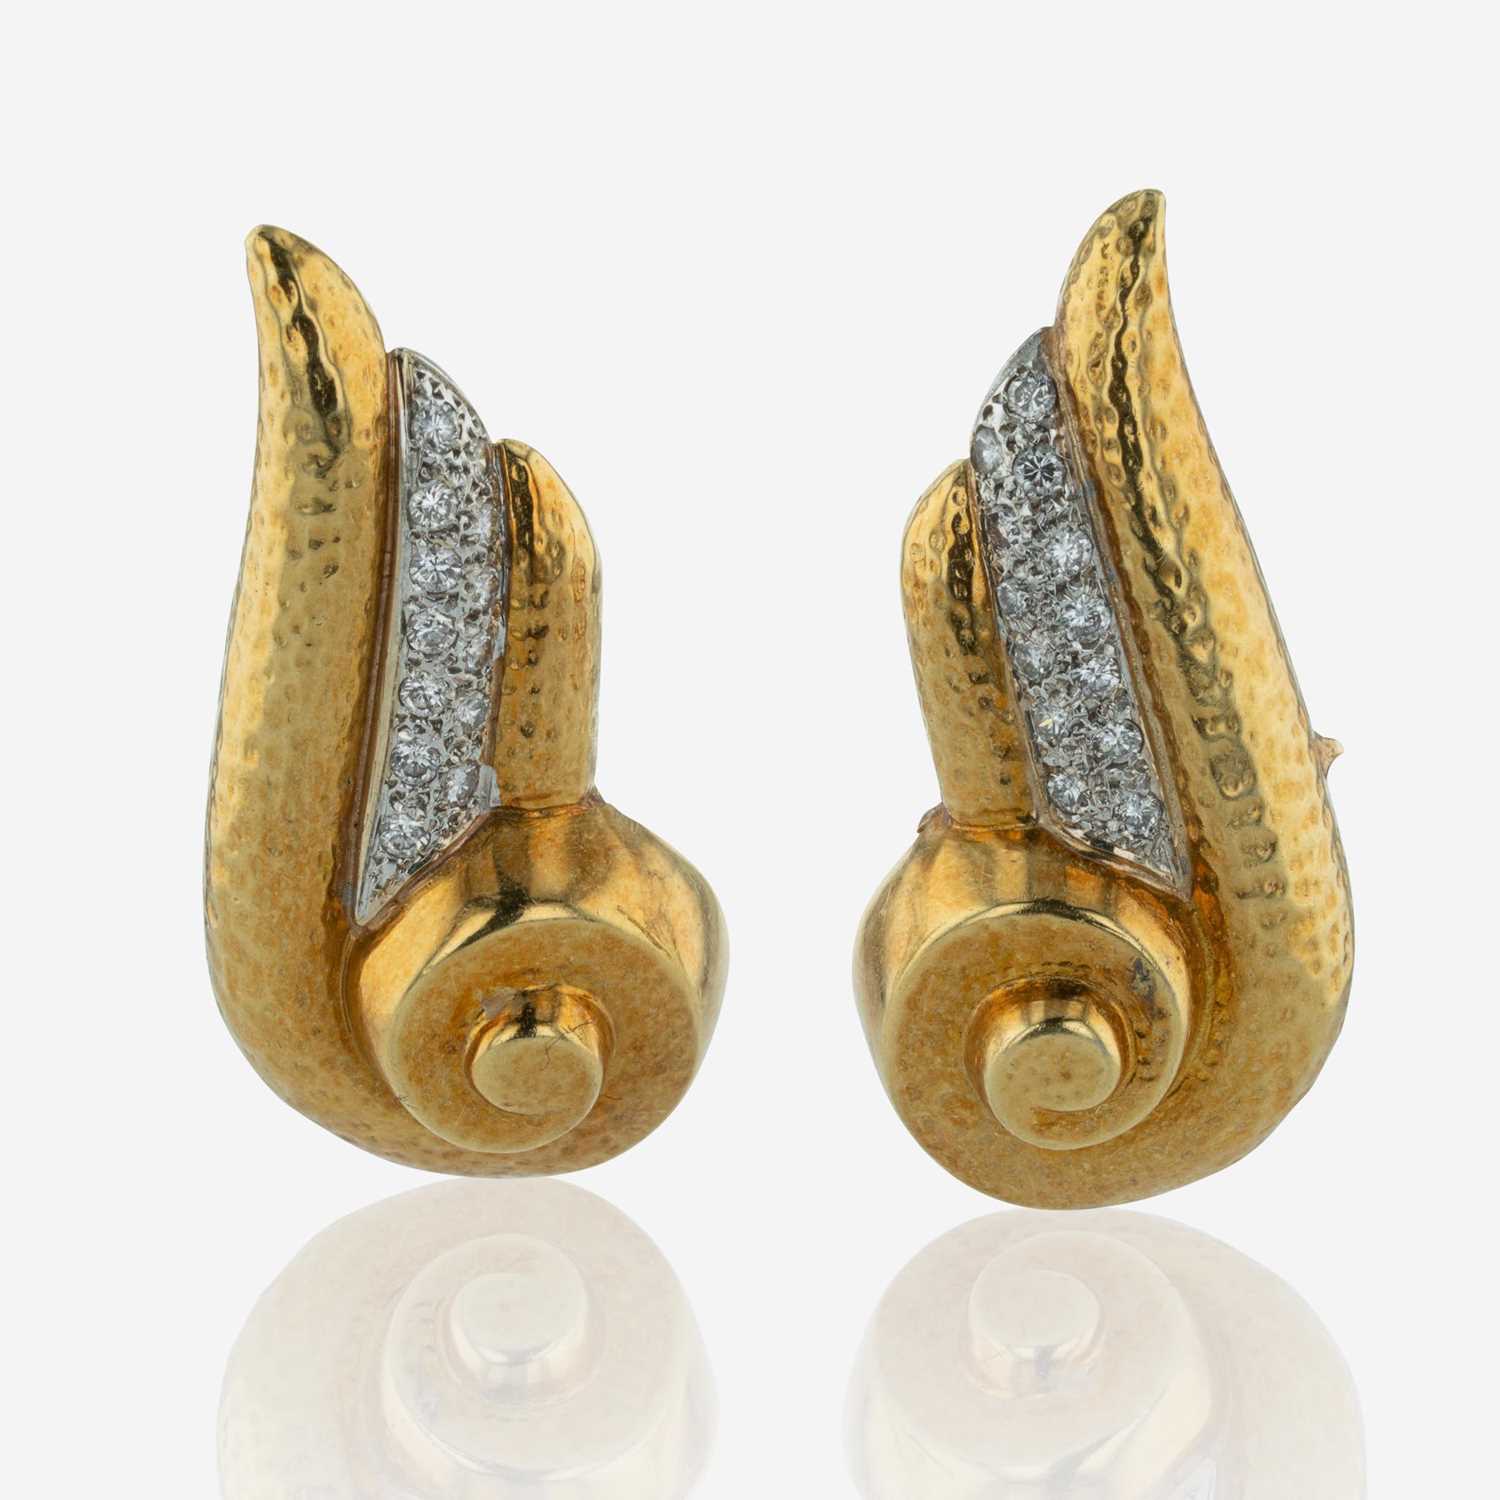 Lot 271 - A Pair of Two-Tone 18K Gold and Diamond Earrings